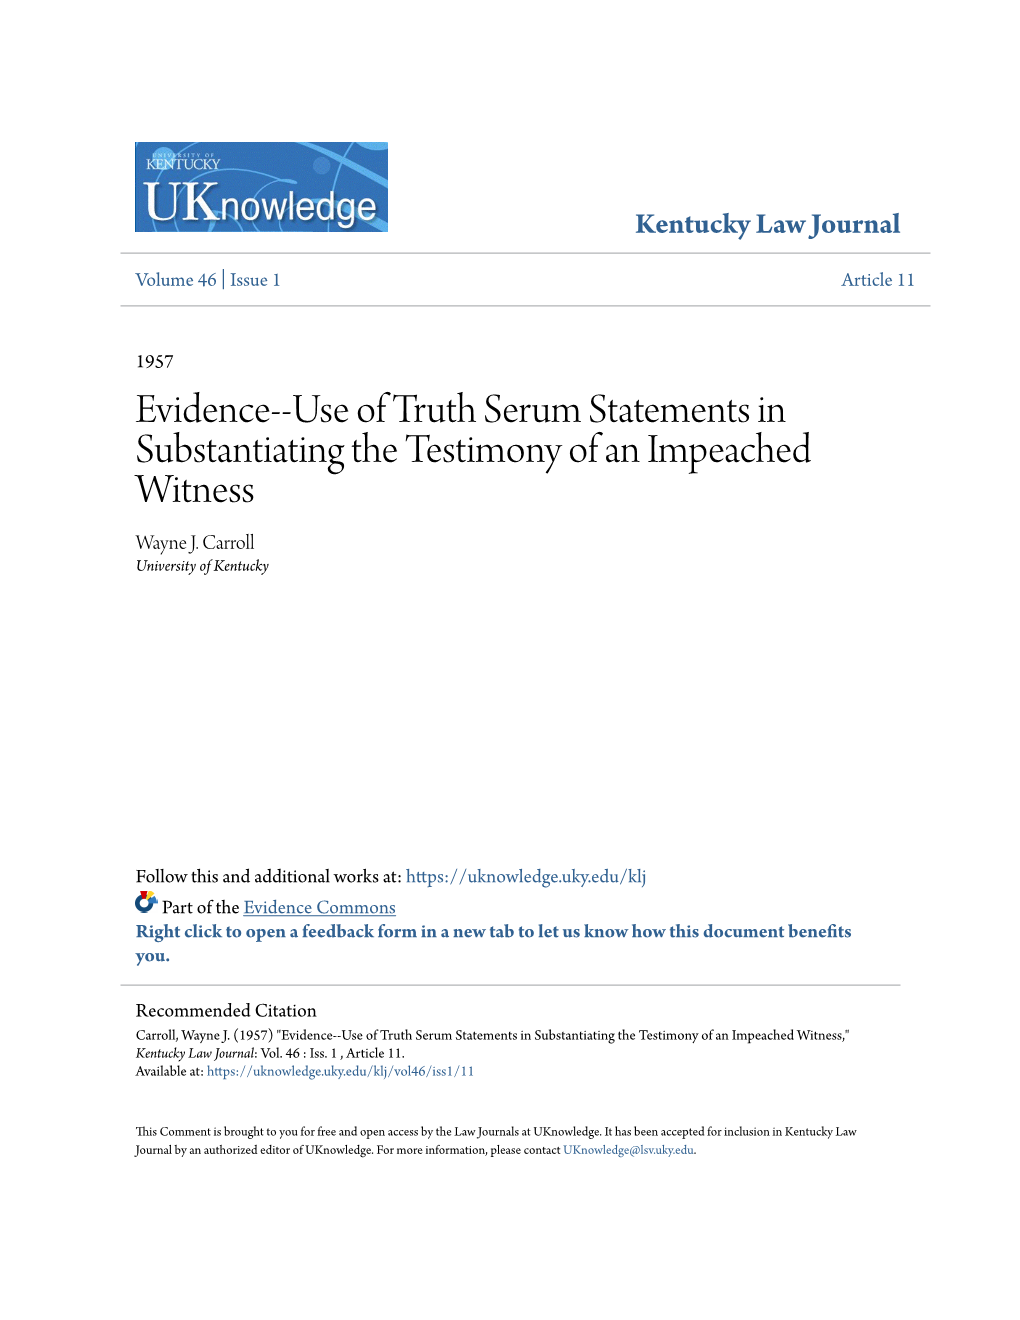 Evidence--Use of Truth Serum Statements in Substantiating the Testimony of an Impeached Witness Wayne J